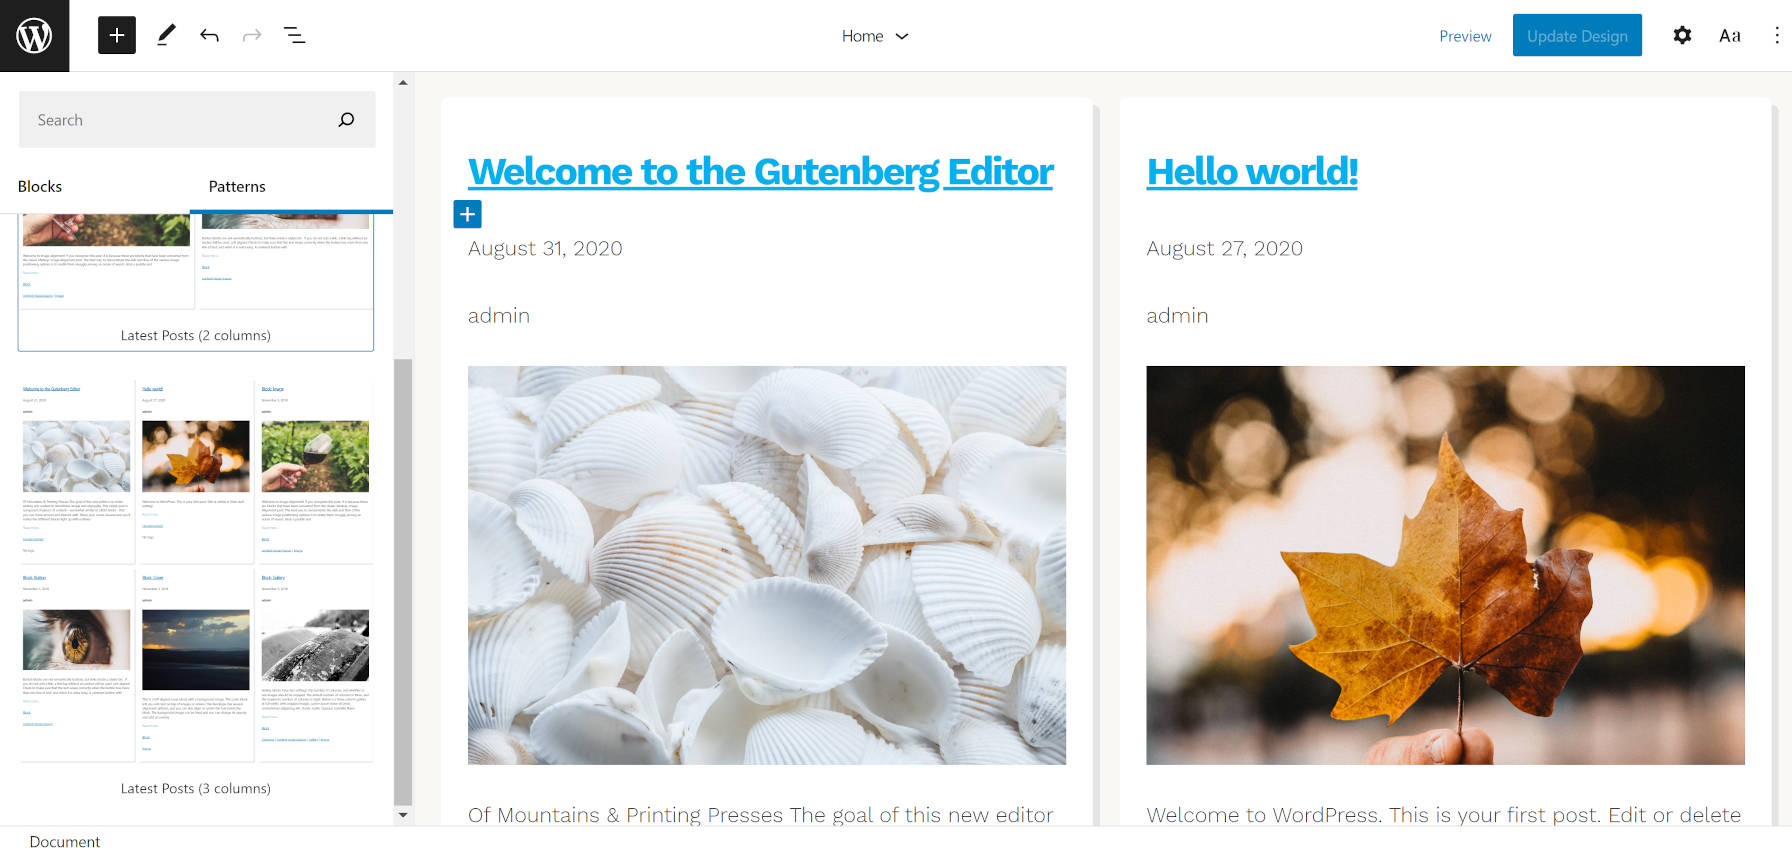 Blog posts patterns included in the Hansen WordPress theme.